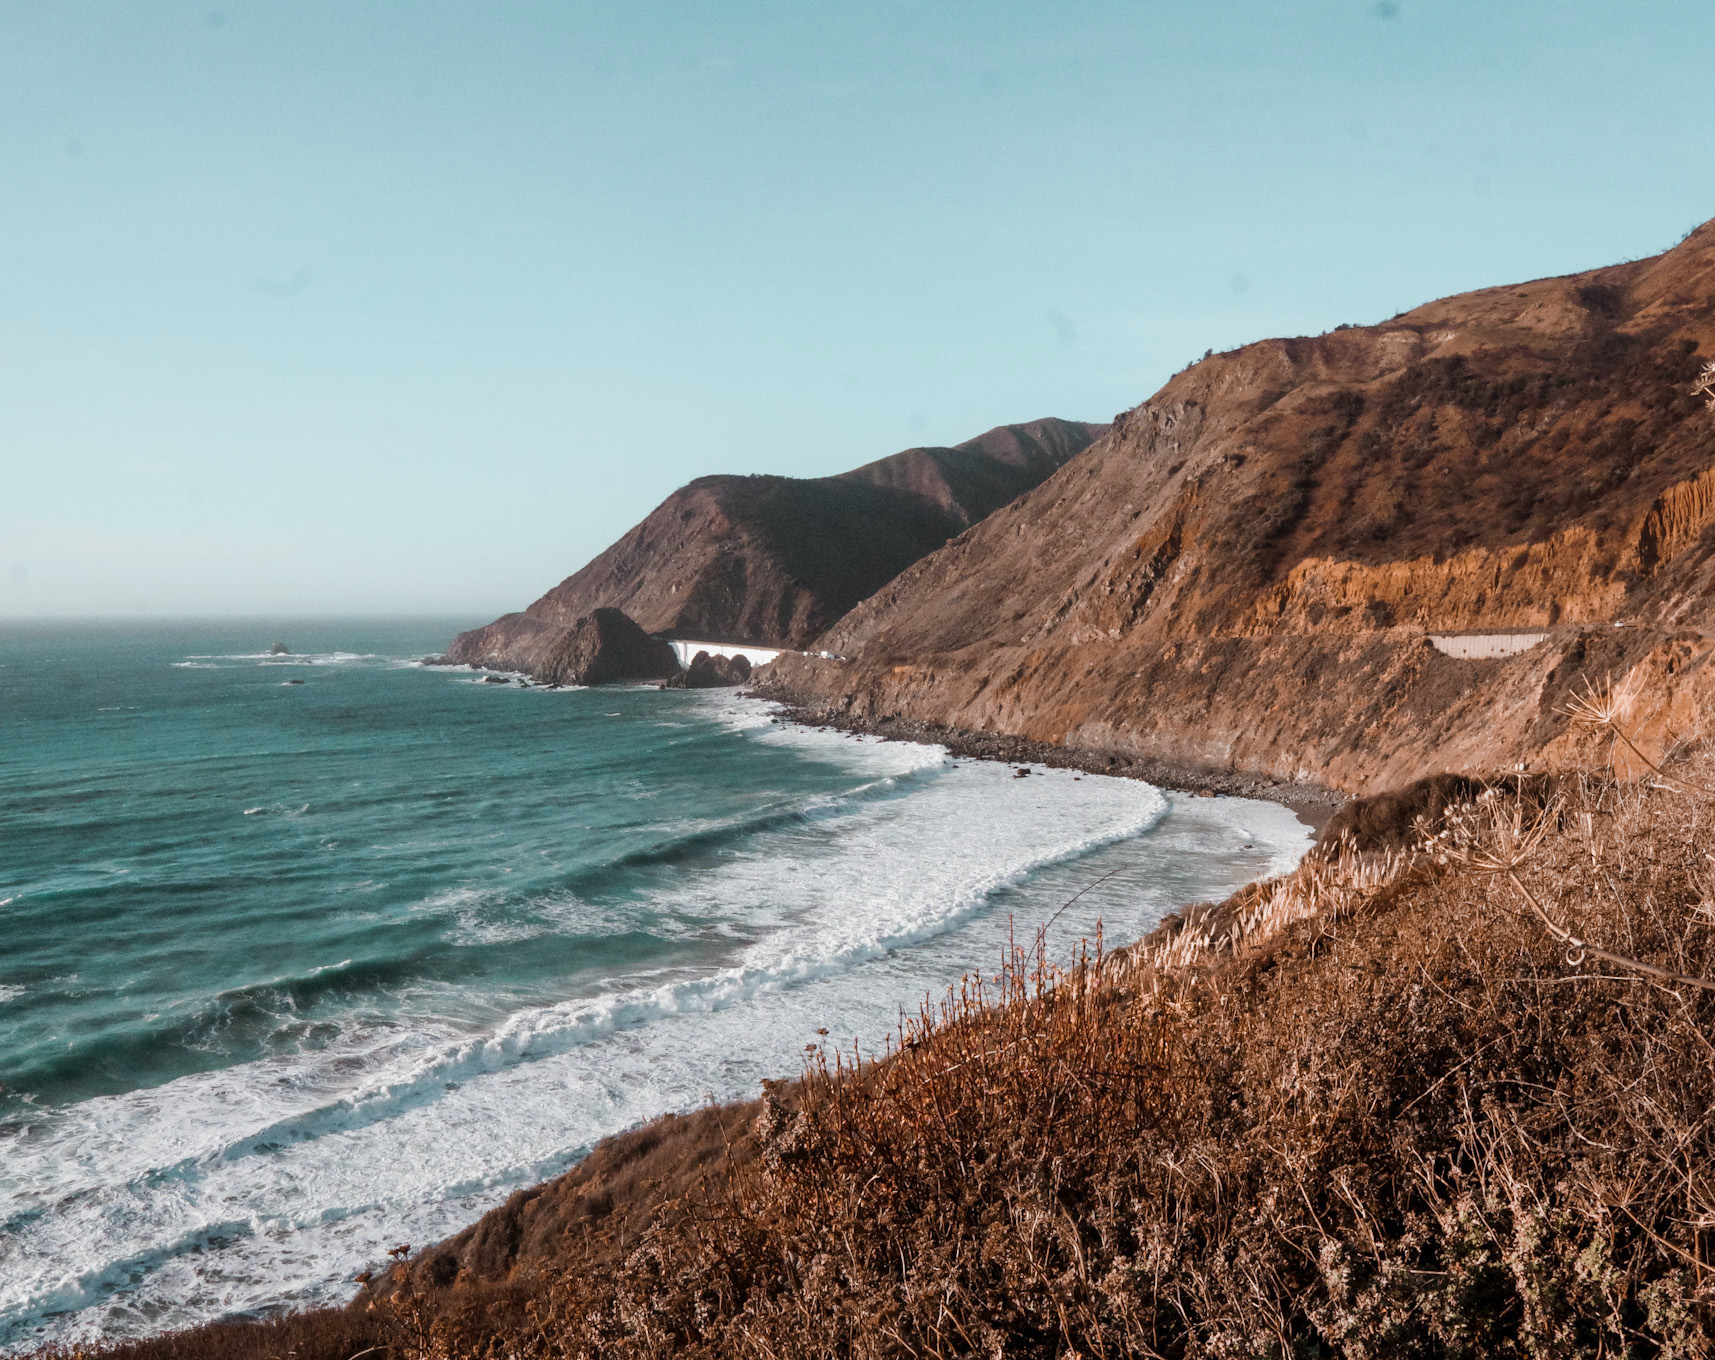 Places to see in Big Sur, Lilly Valley, McWay, Bixby Bridge